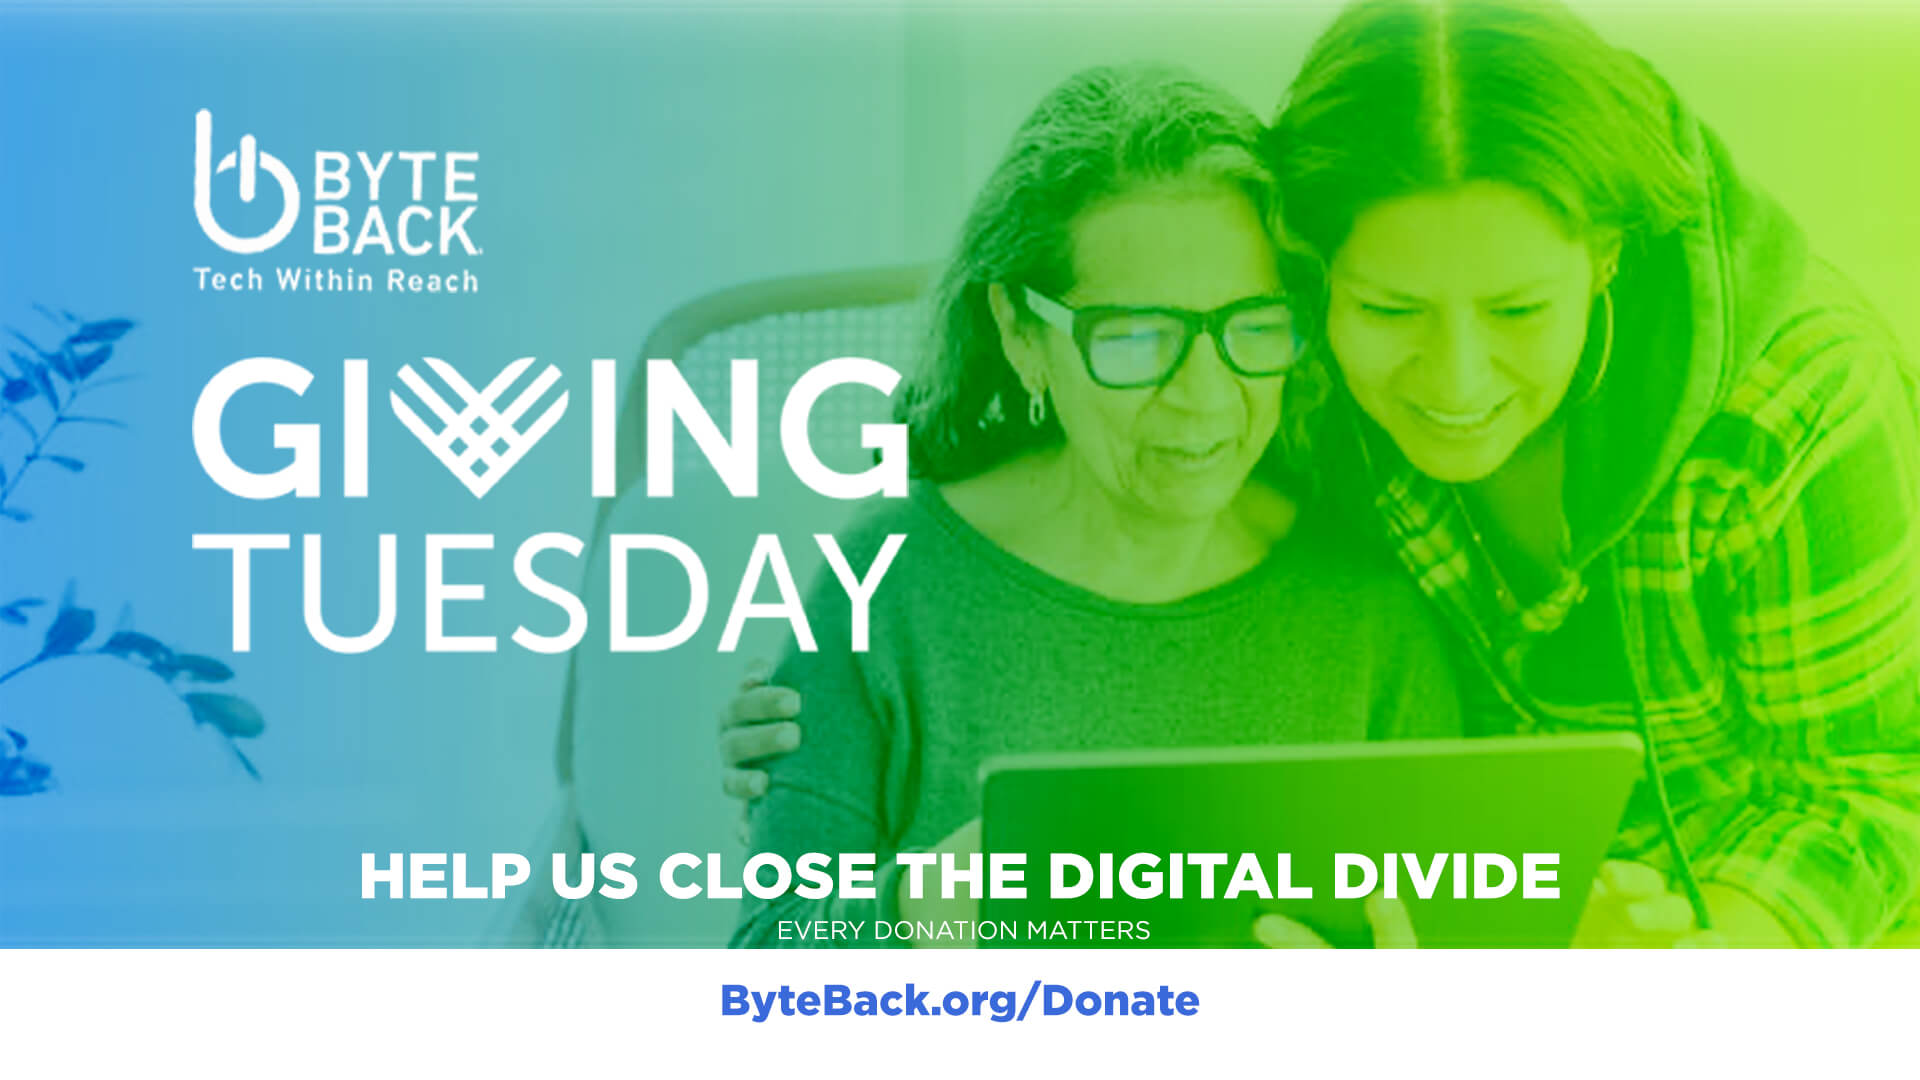 Support Byte Back this Giving Tuesday